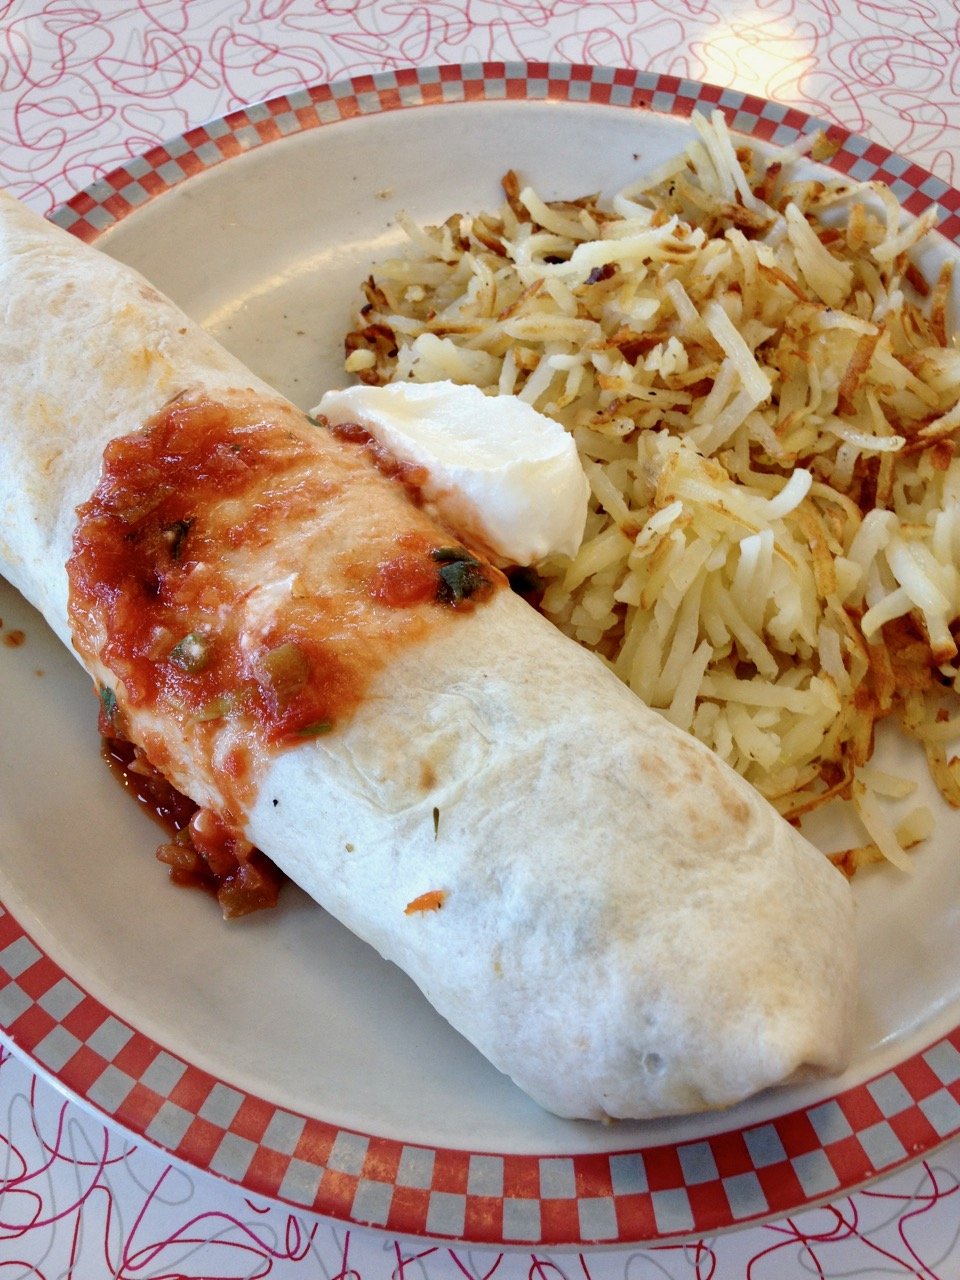 Smothered breakfast burrito at Sloopy's Diner in the Ohio Union